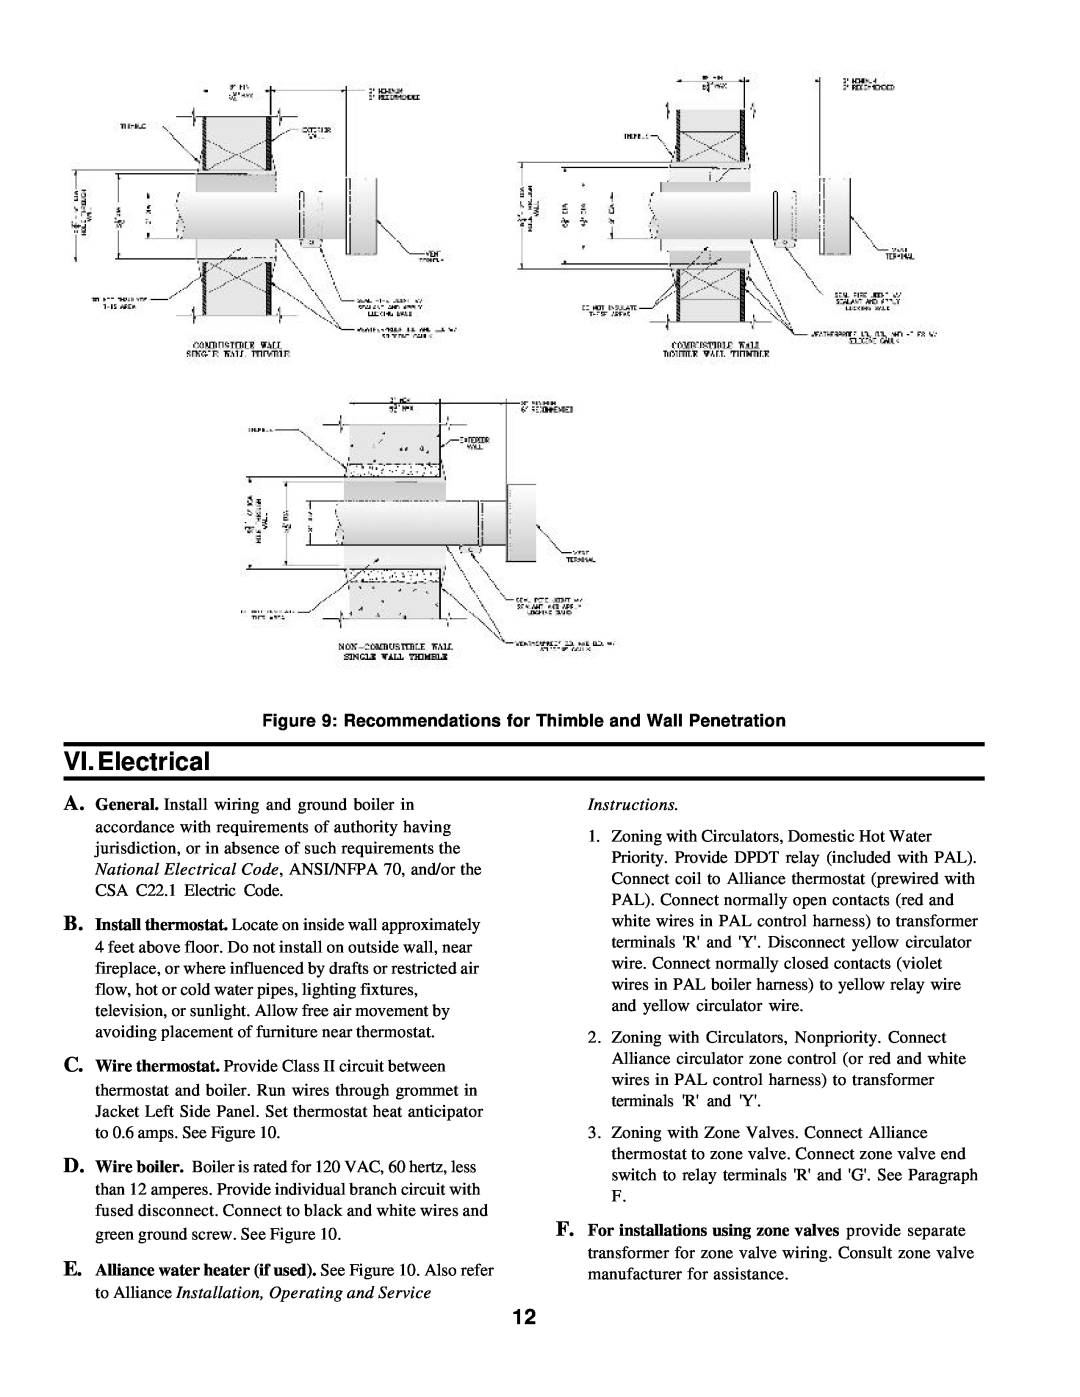 Burnham 20_PV_I manual VI. Electrical, Recommendations for Thimble and Wall Penetration, Instructions 